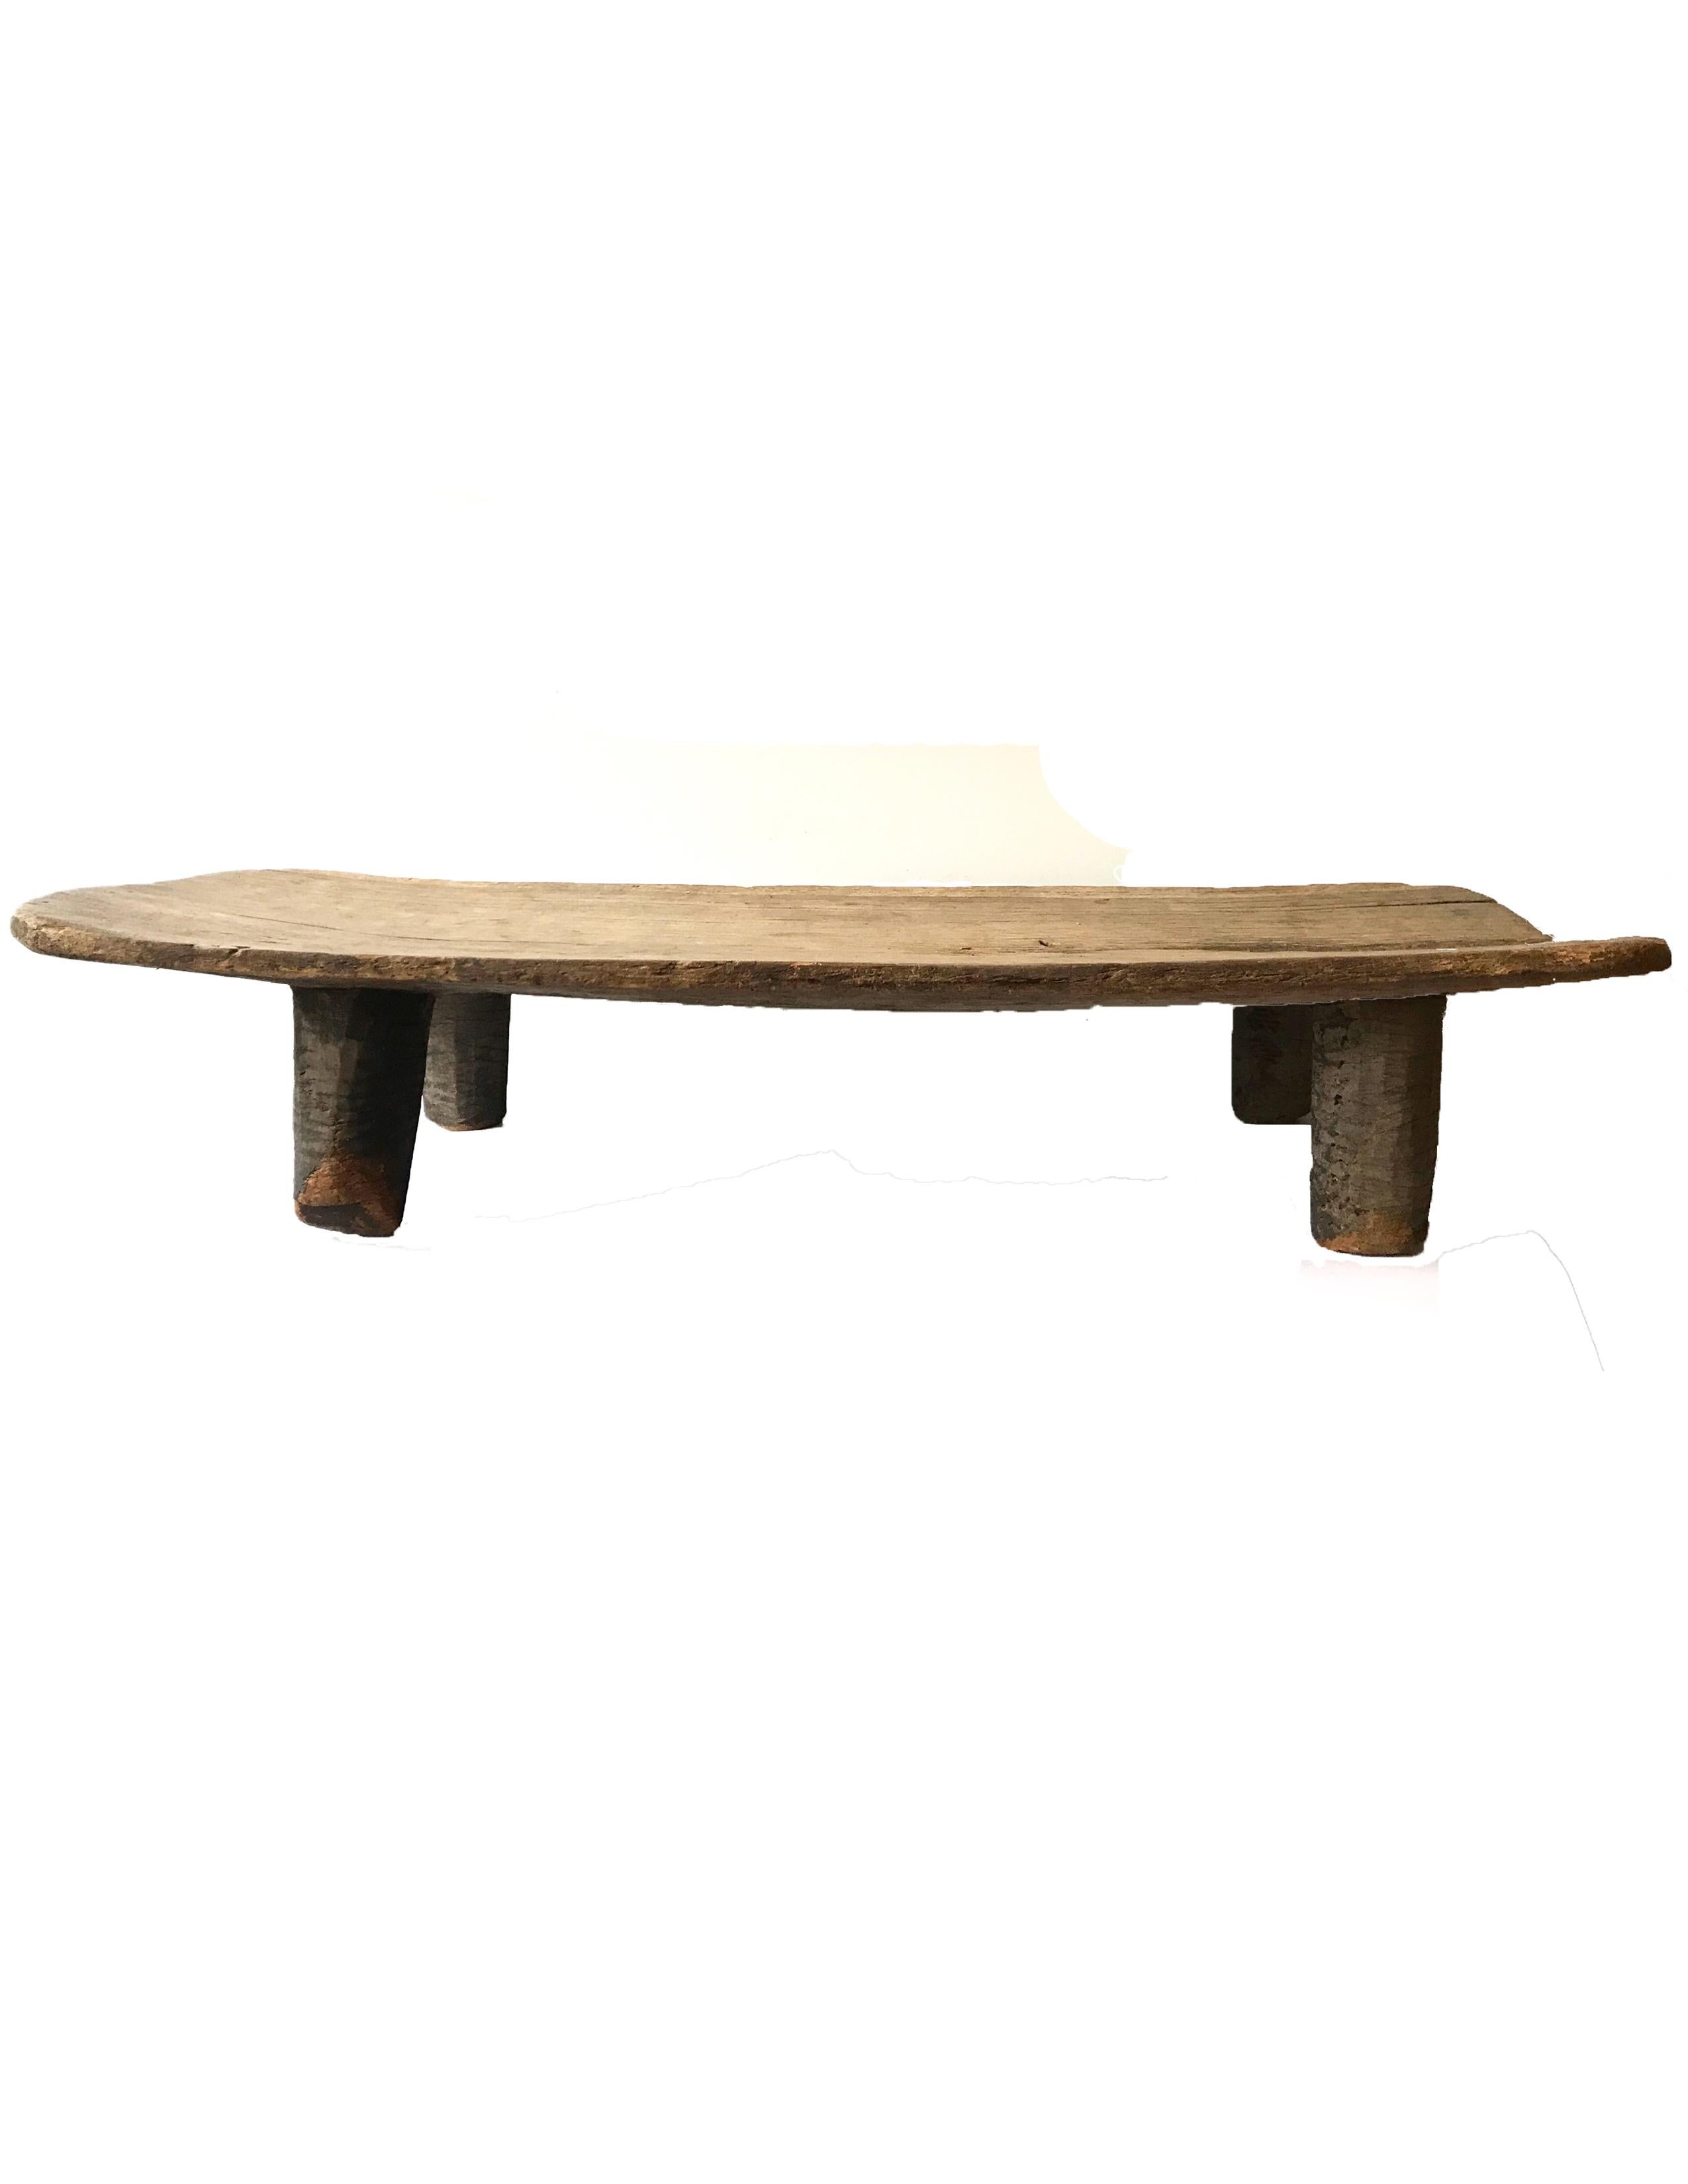 Early 20th century African weathered wooden bench/table.


Measurements: 62 in. W x 24.75 in. D and between 11-13 in. H.

 